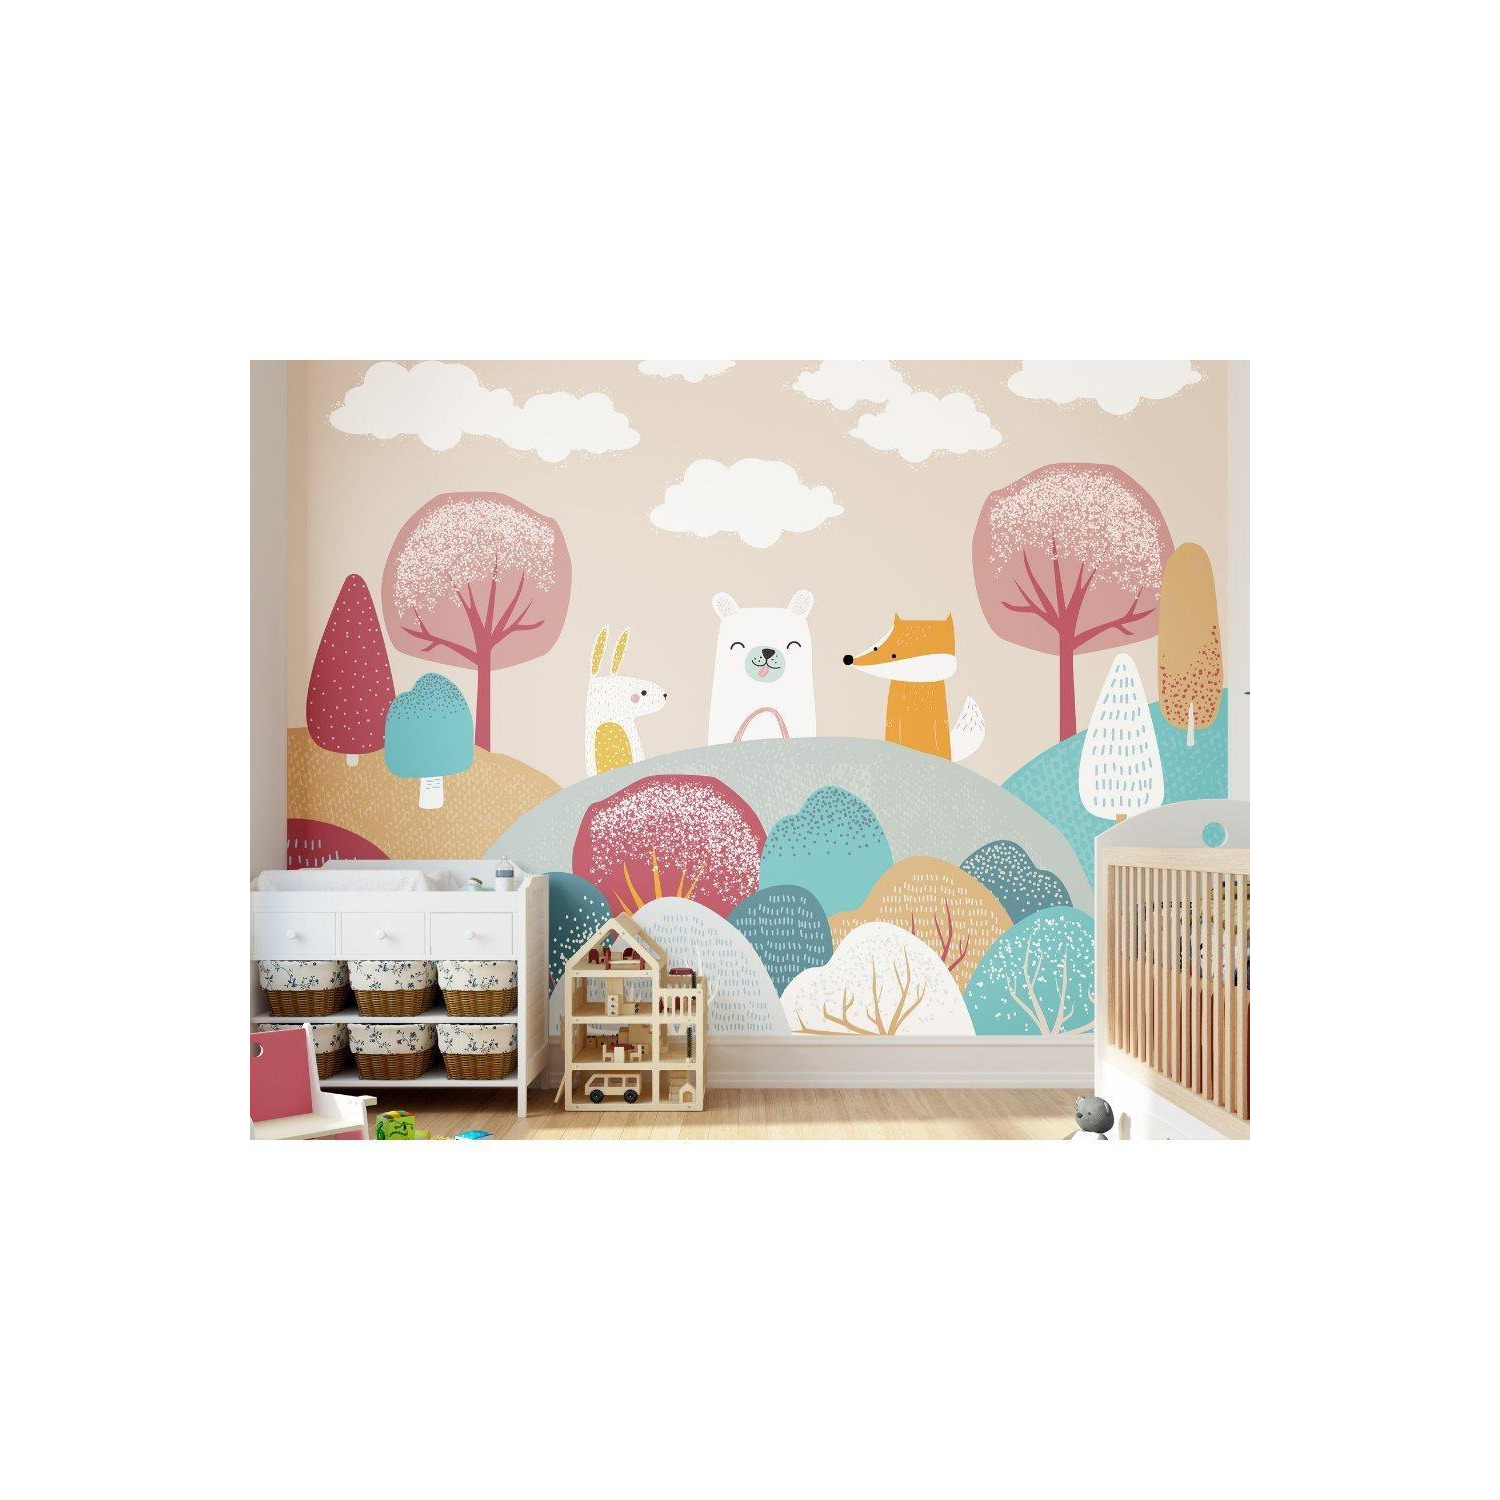 Woodland Friends Wall Mural - image 1